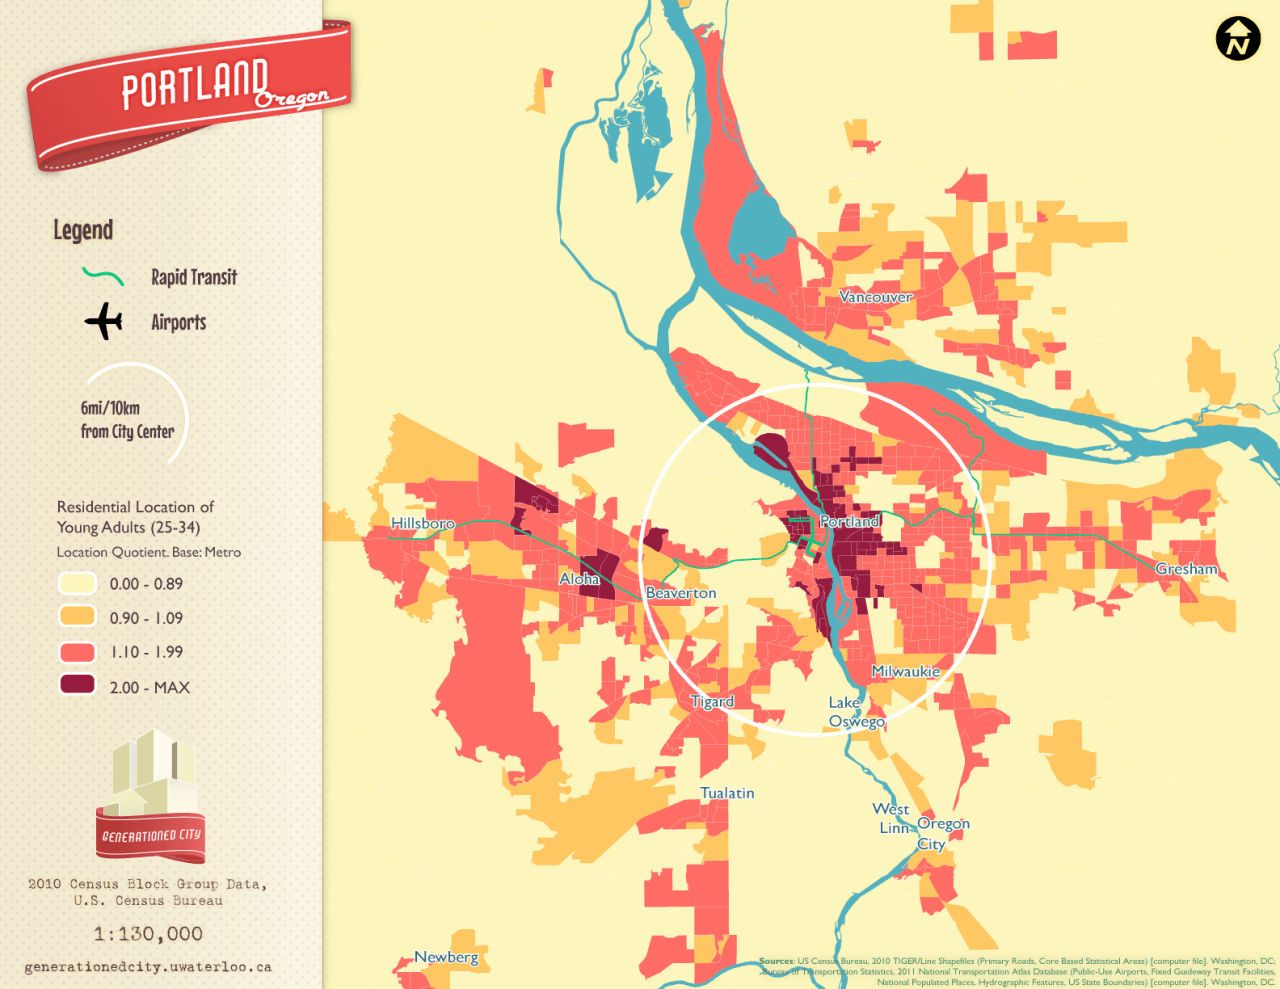 Residential location of young adults in Portland.